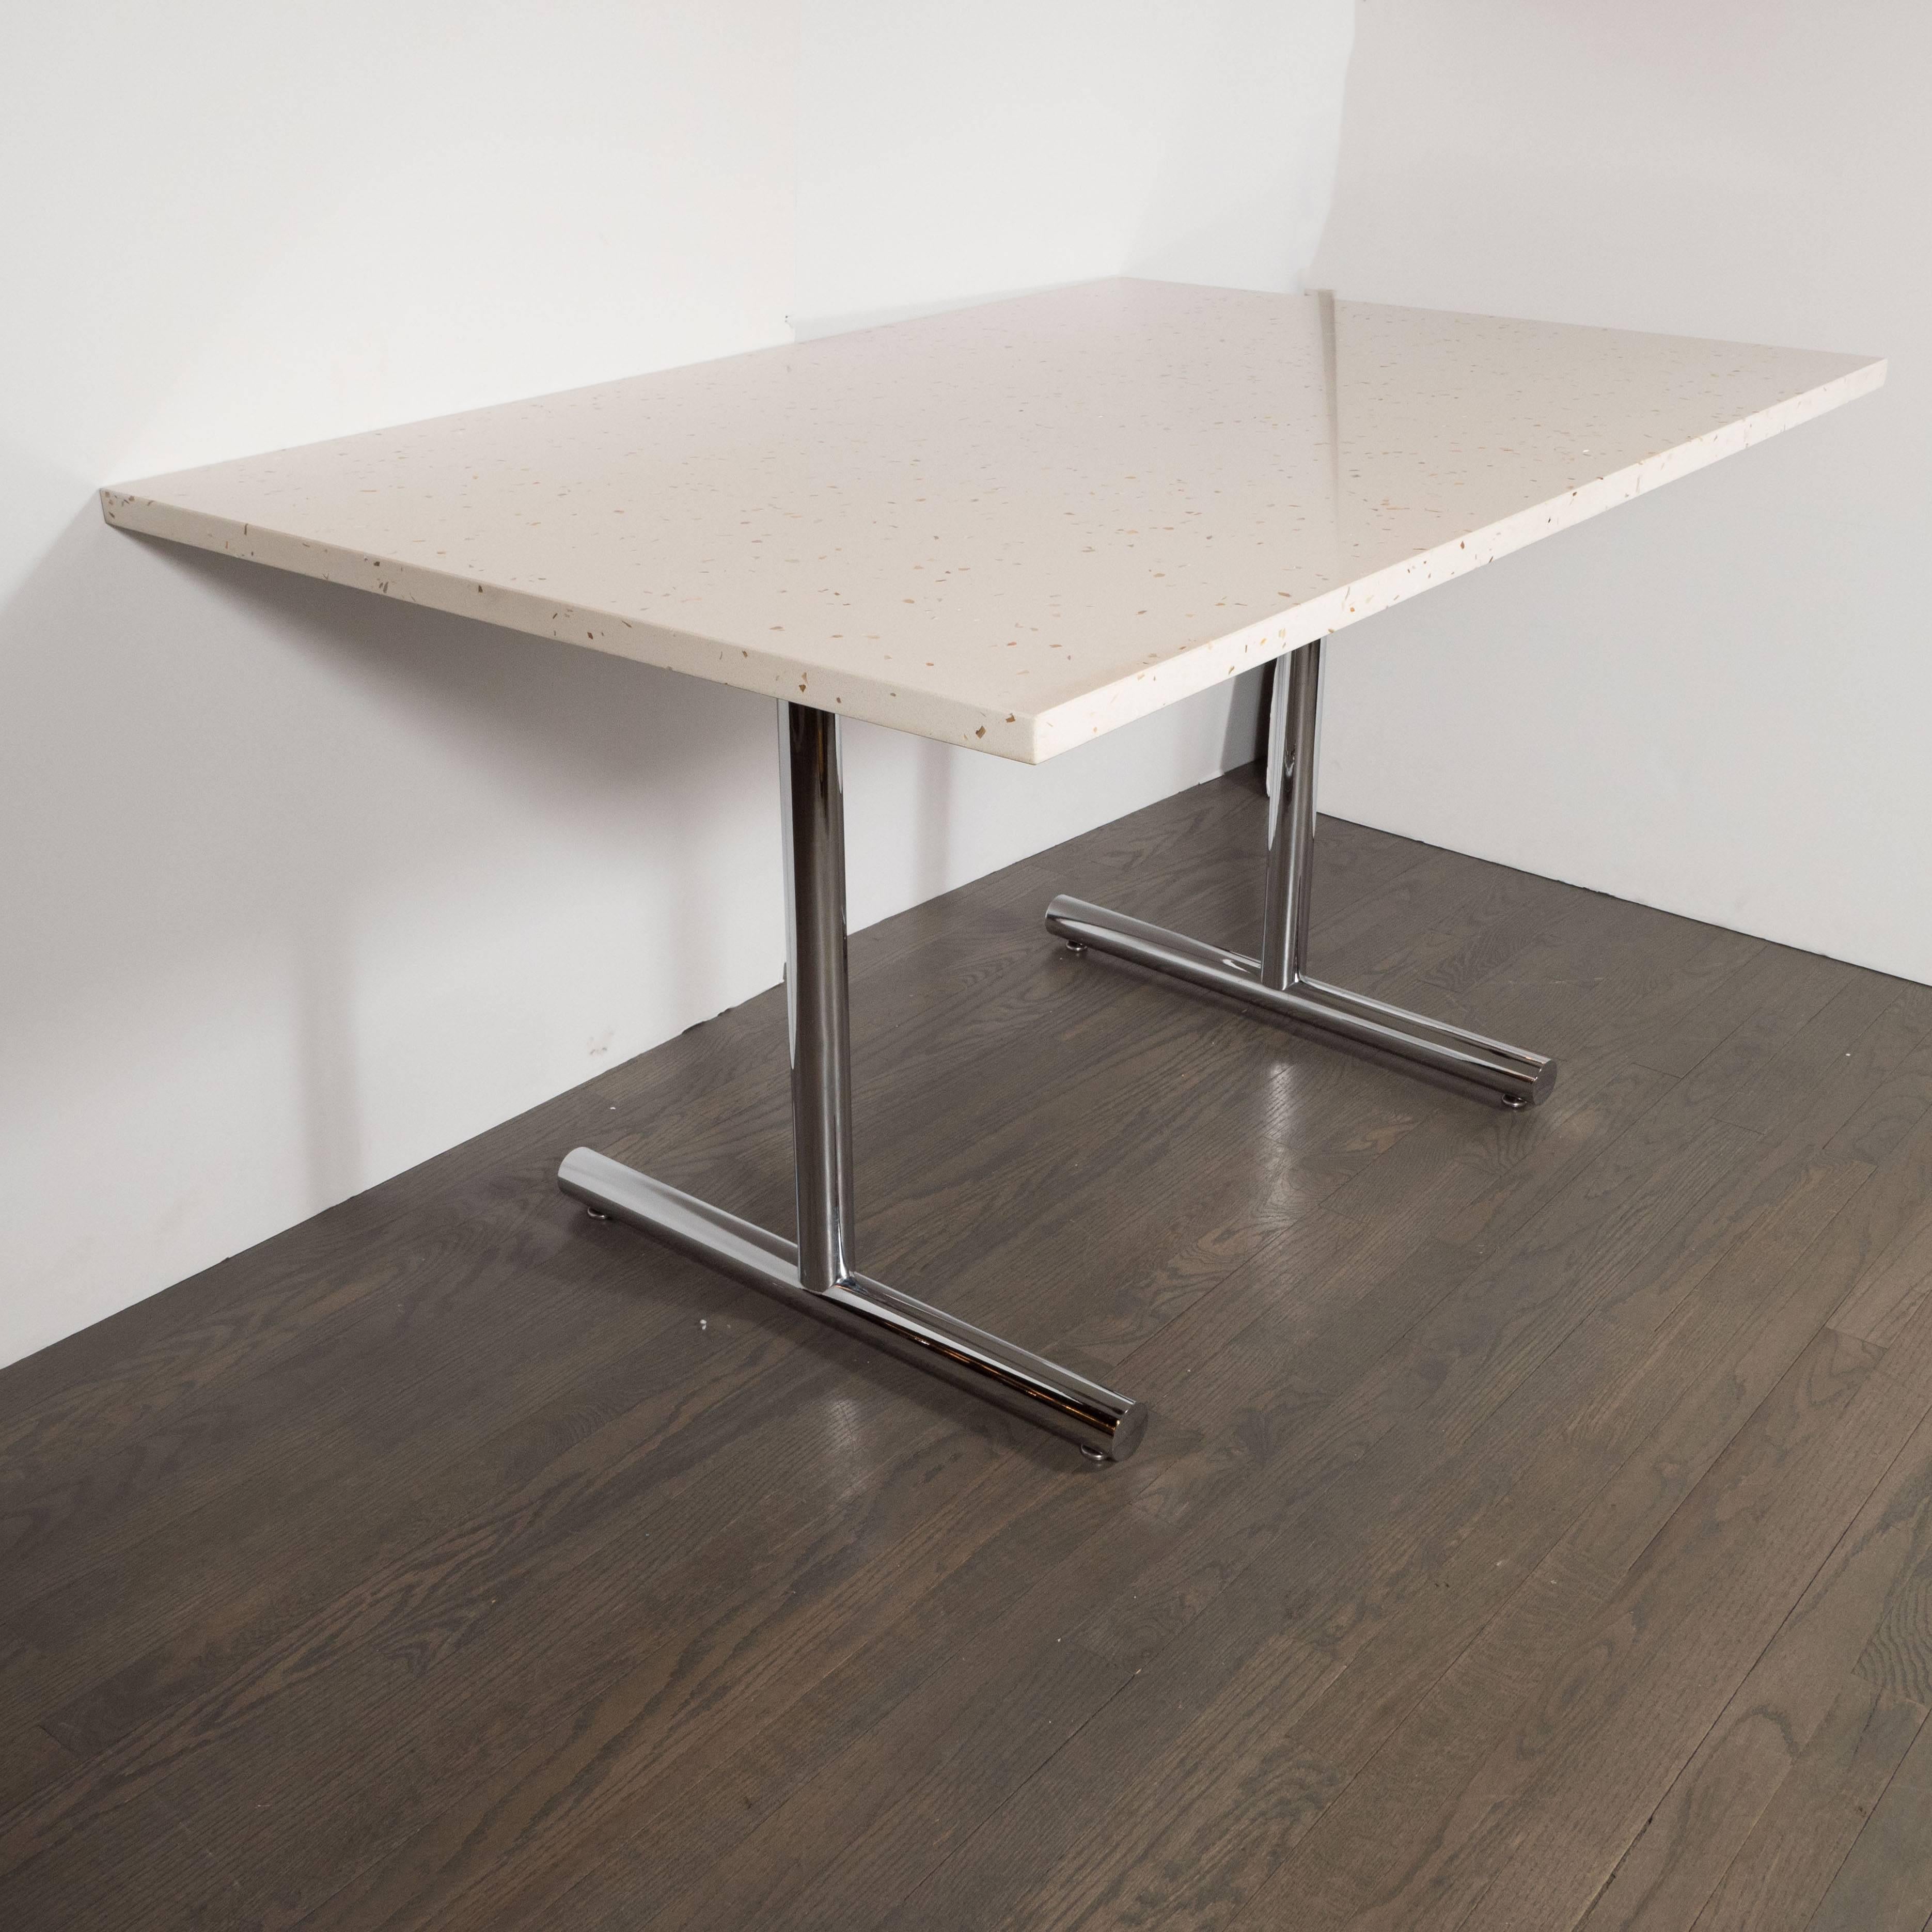 This bold and beautiful Mid-Century Modern table features a rectangular top executed in Terrazzo, offering a wealth of texture, as well as hues of mother-of-pearl, caramel and smoked topaz. The table is supported by two tubular legs that culminate